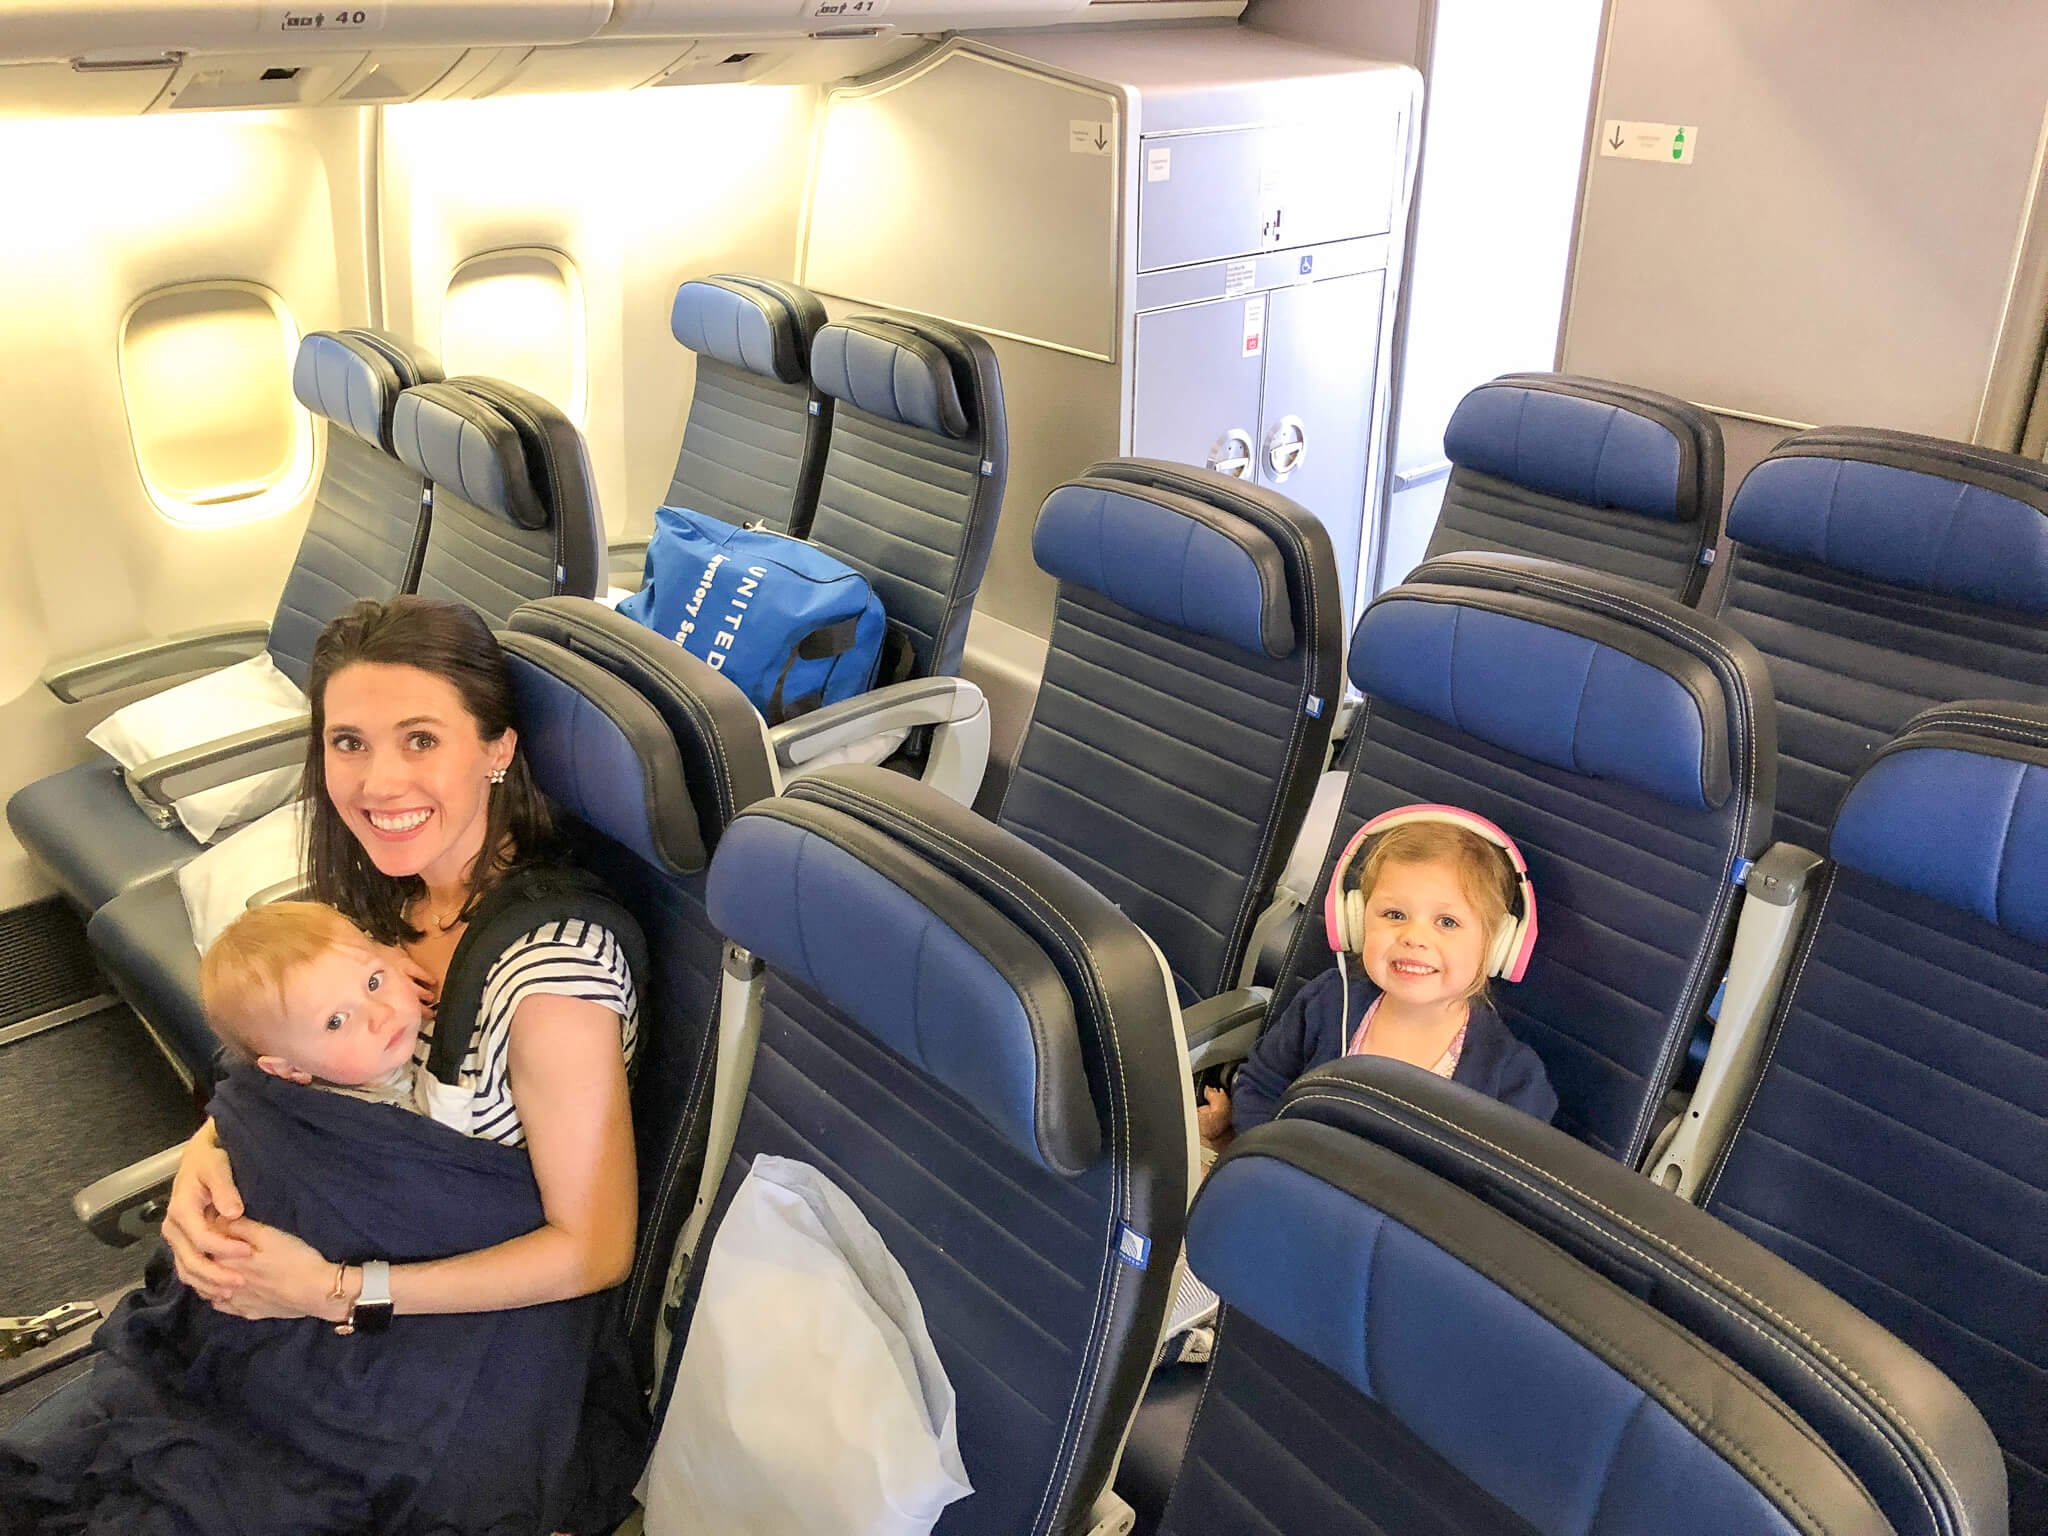 Using a baby carrier during the flight